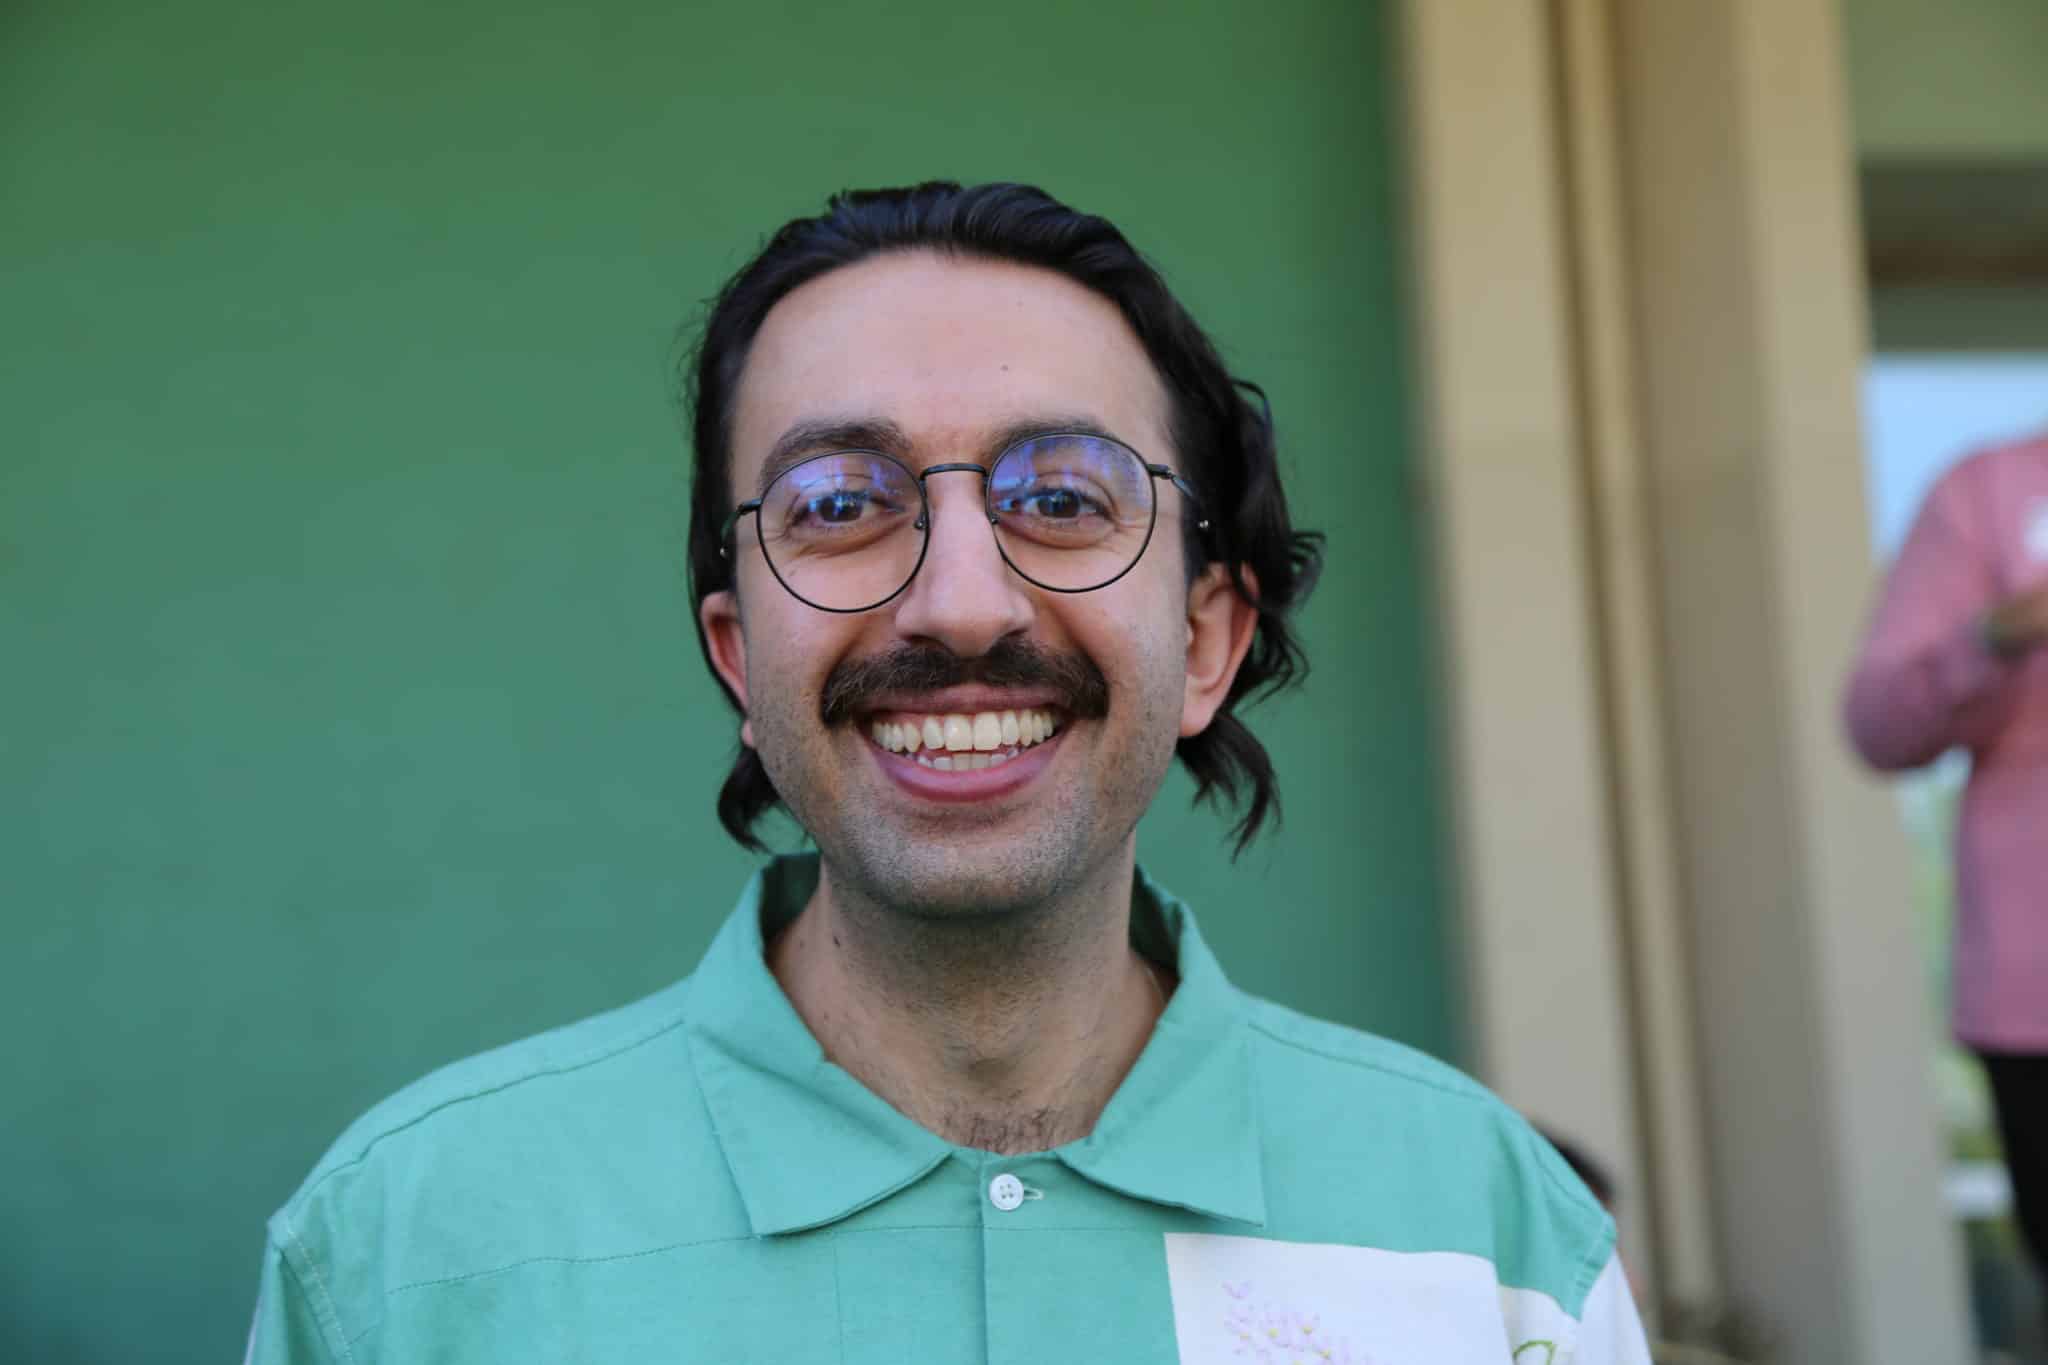 A person in glasses smiles for the camera